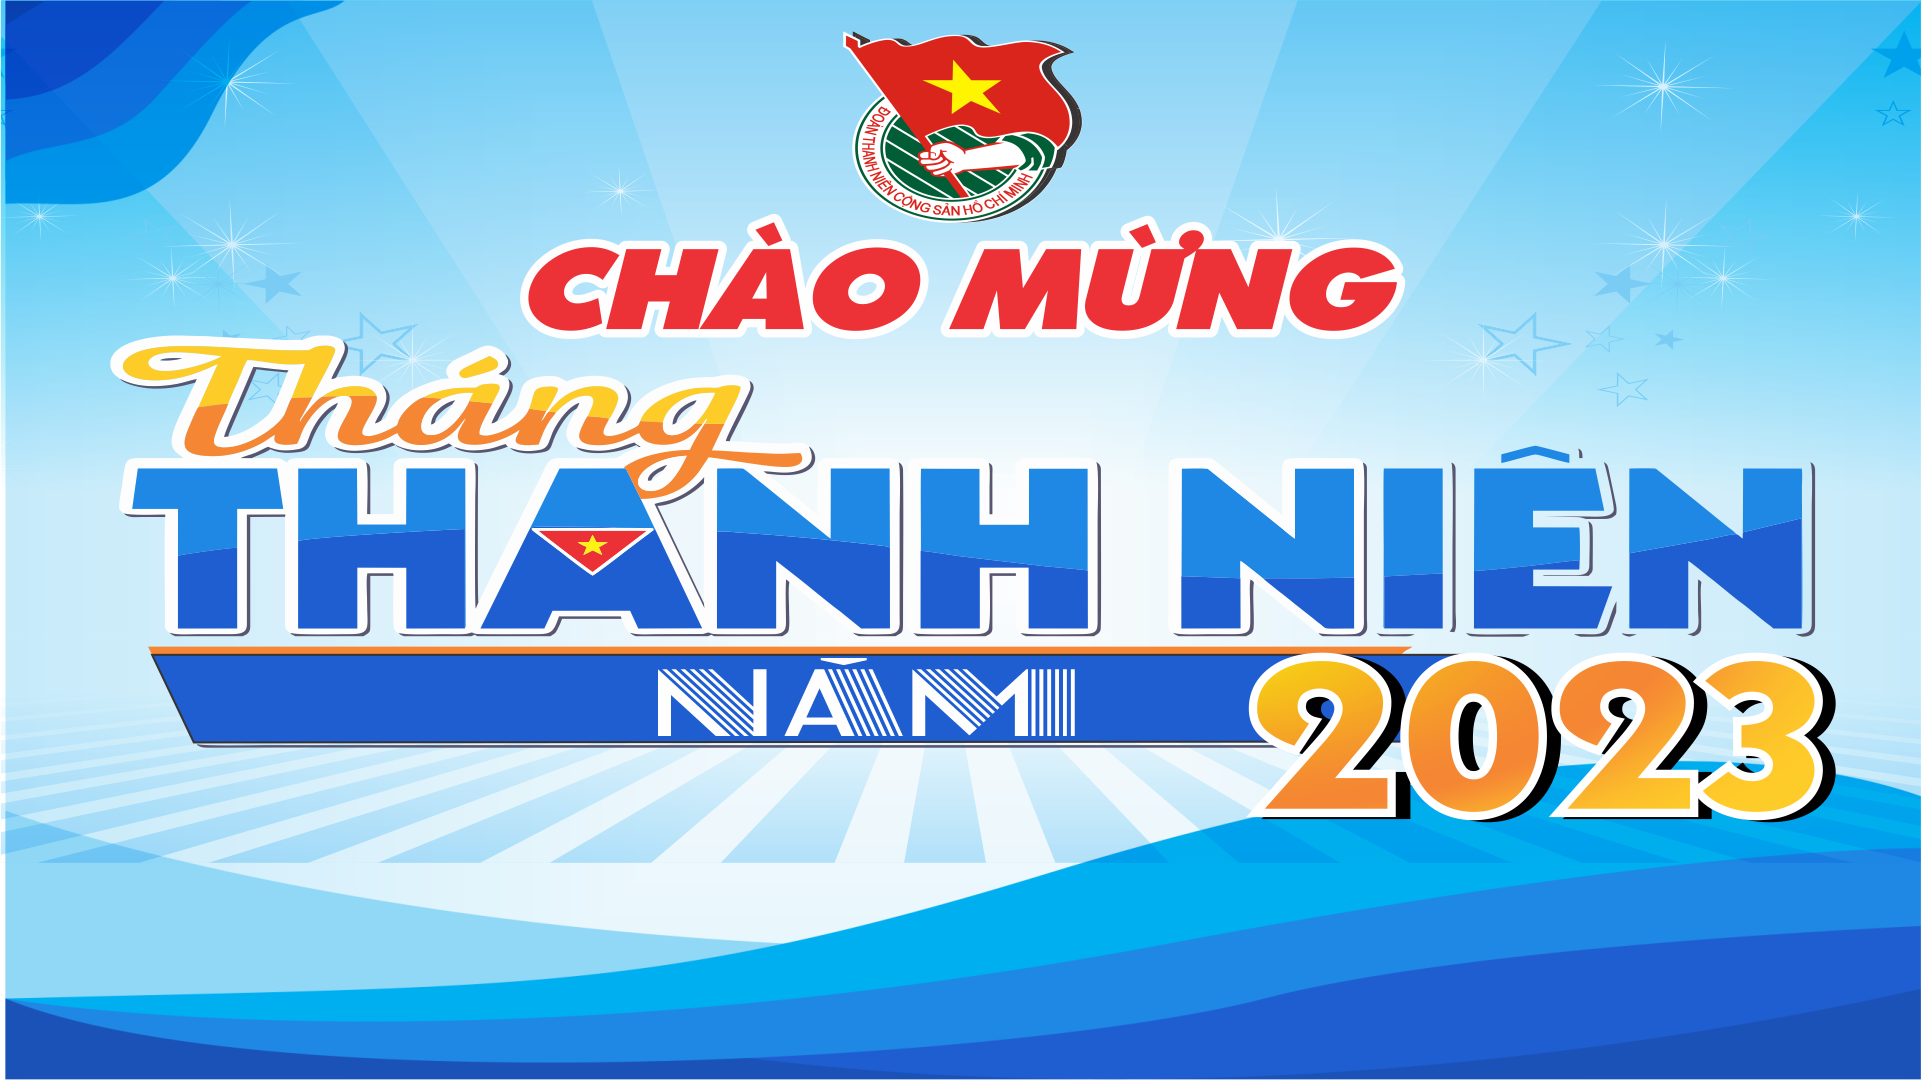 6 Chao thang Thanh Nien